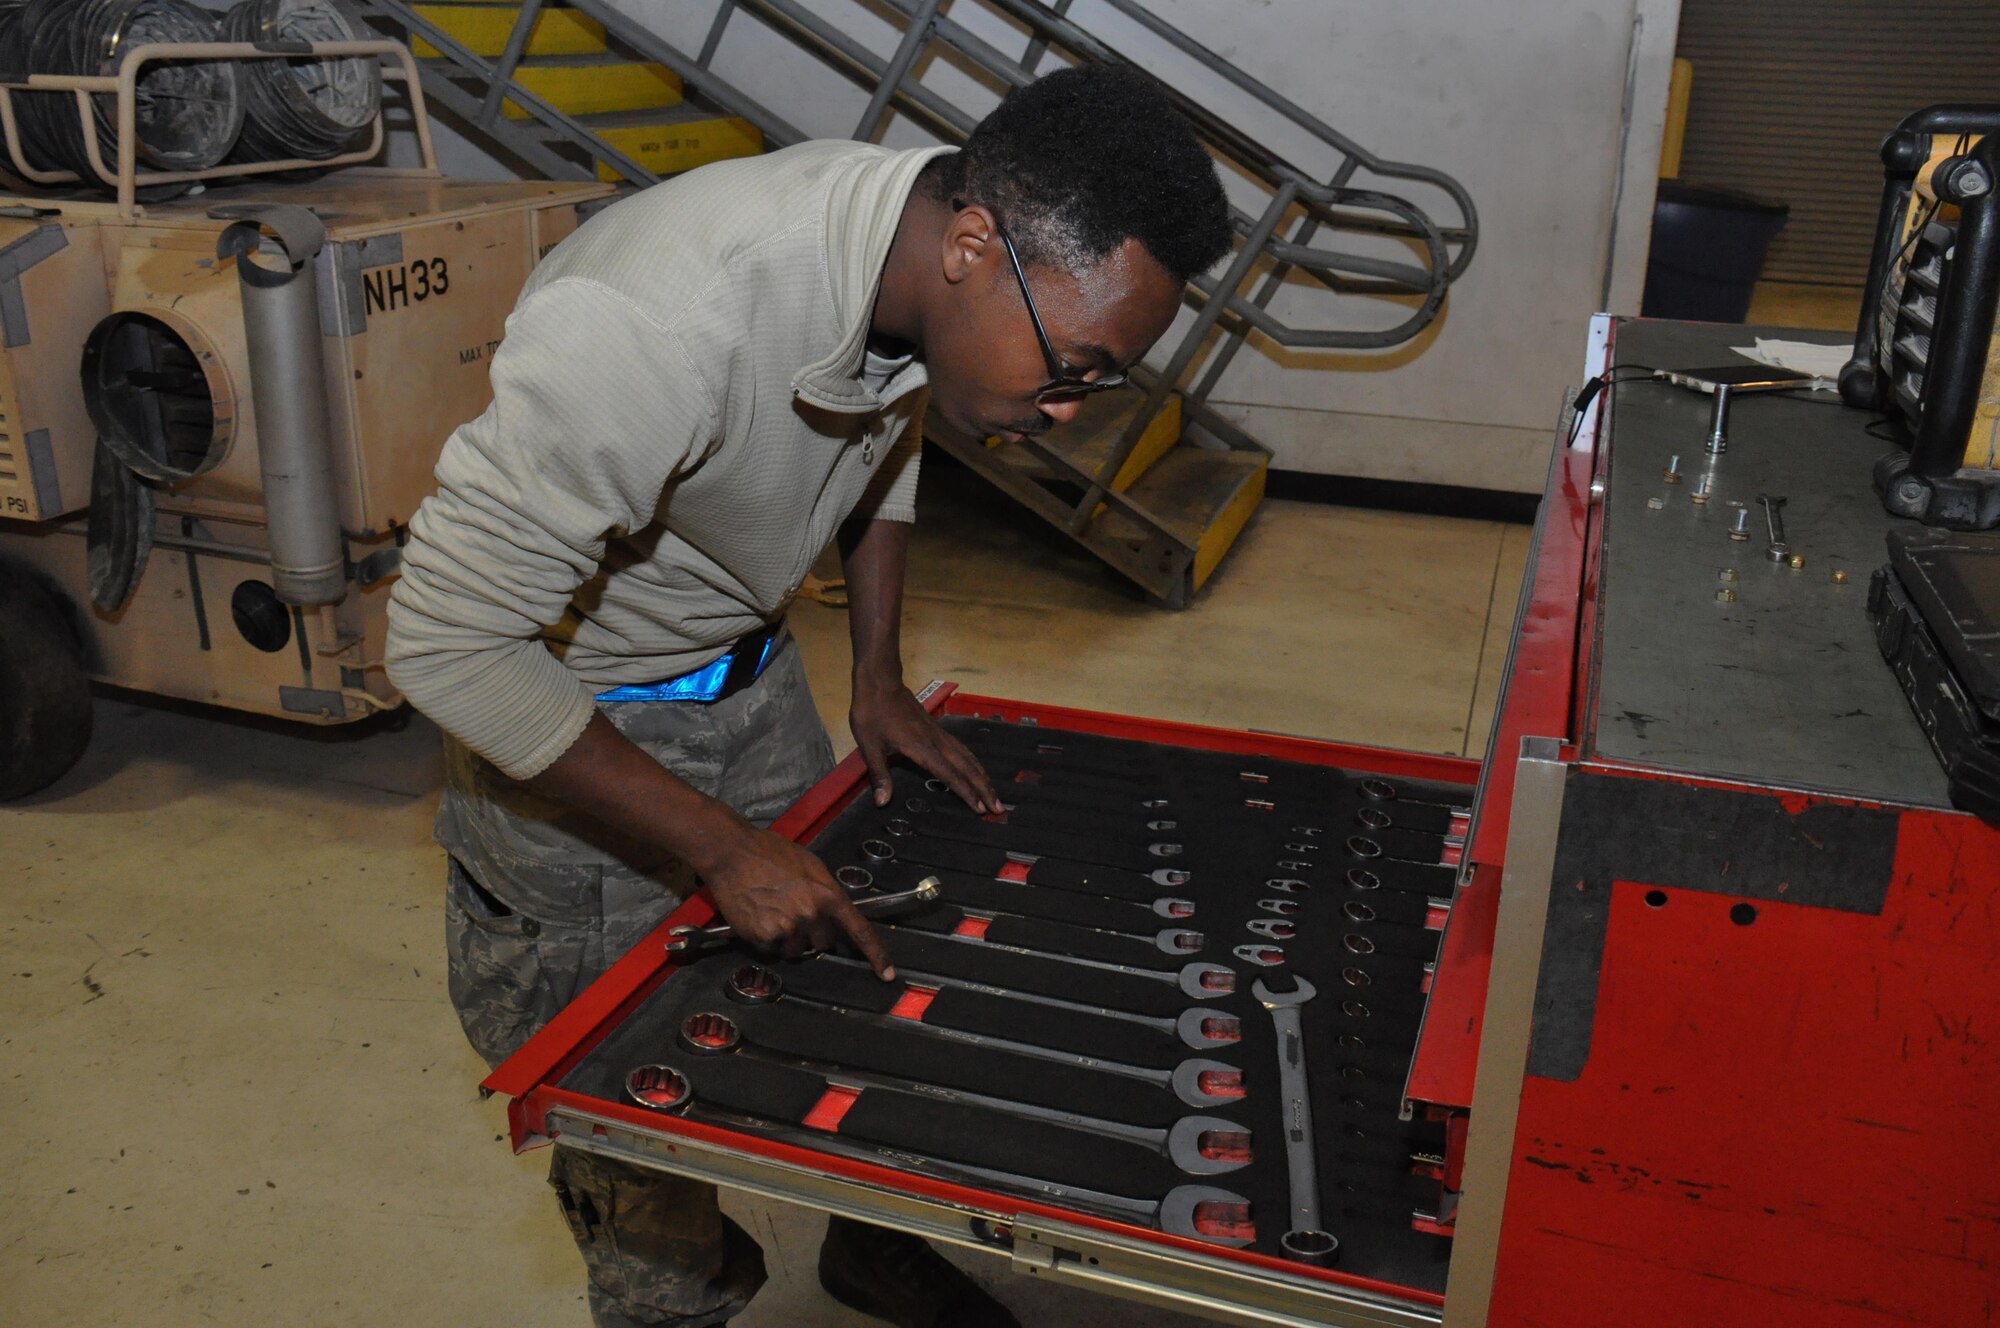 Airman 1st Class Michael Higgins, 379th Expeditionary Maintenance Squadron Aerospace Ground Equipment mechanic from New York, searches for tools to work on a new generation heater inside the AGE Flight facility at Al Udeid Air Base, Qatar Feb. 4. The flight maintains more than 90 different types of tools and equipment valued at $32 million. (U.S. Air Force photo by Tech. Sgt. James Hodgman/Released)